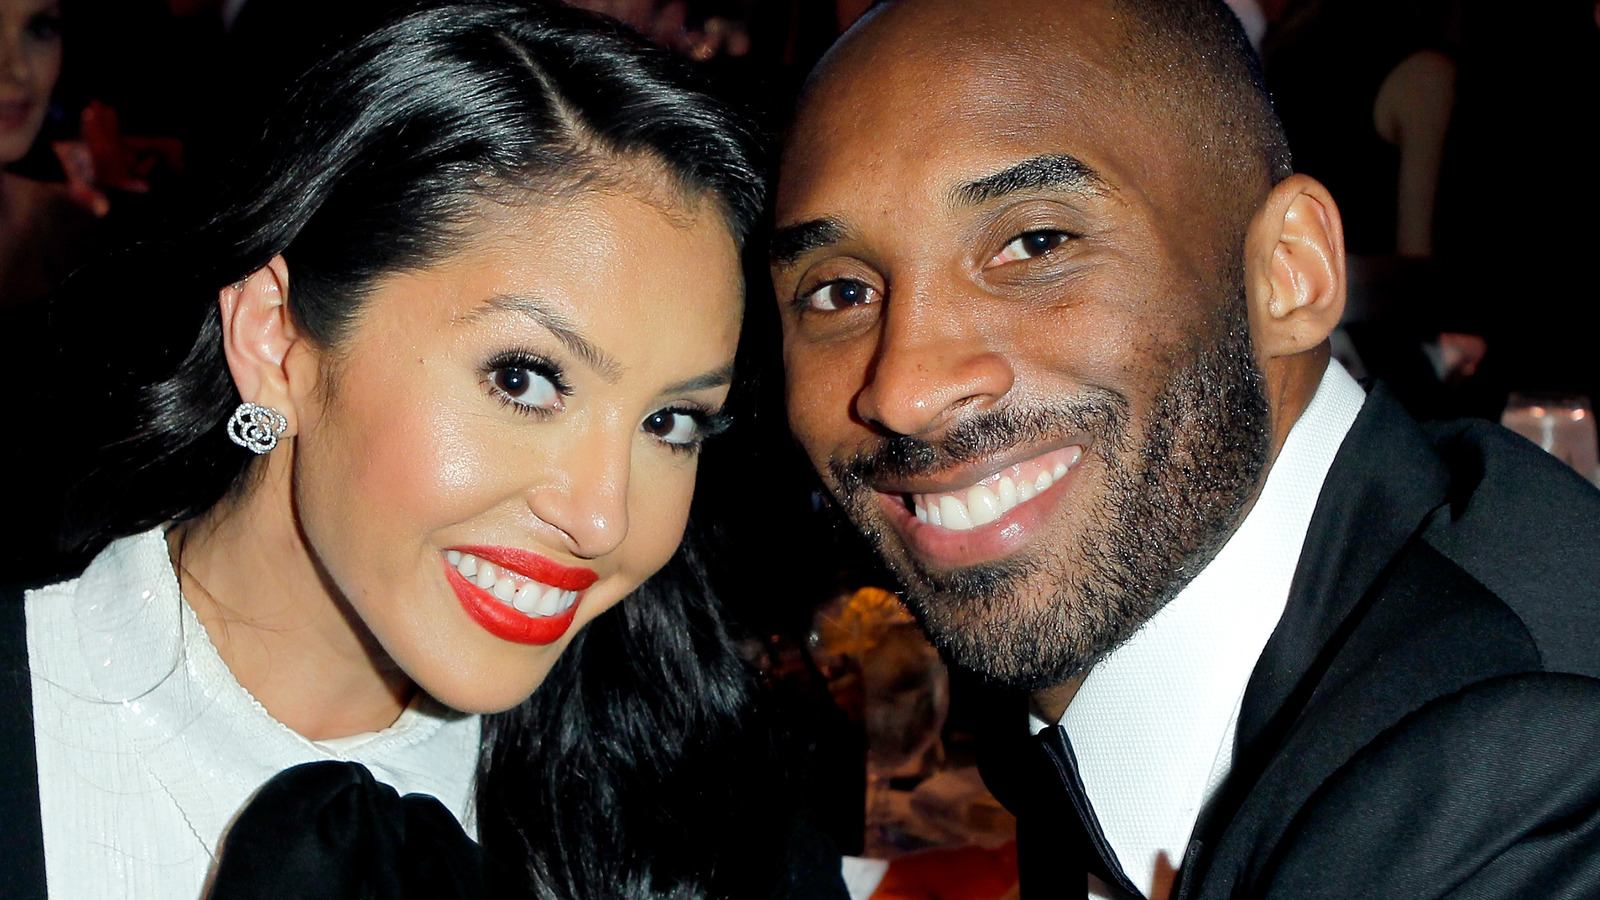 Vanessa Bryant Breaks Down After Witness Recalls Insensitive Joke About Kobe's Remains